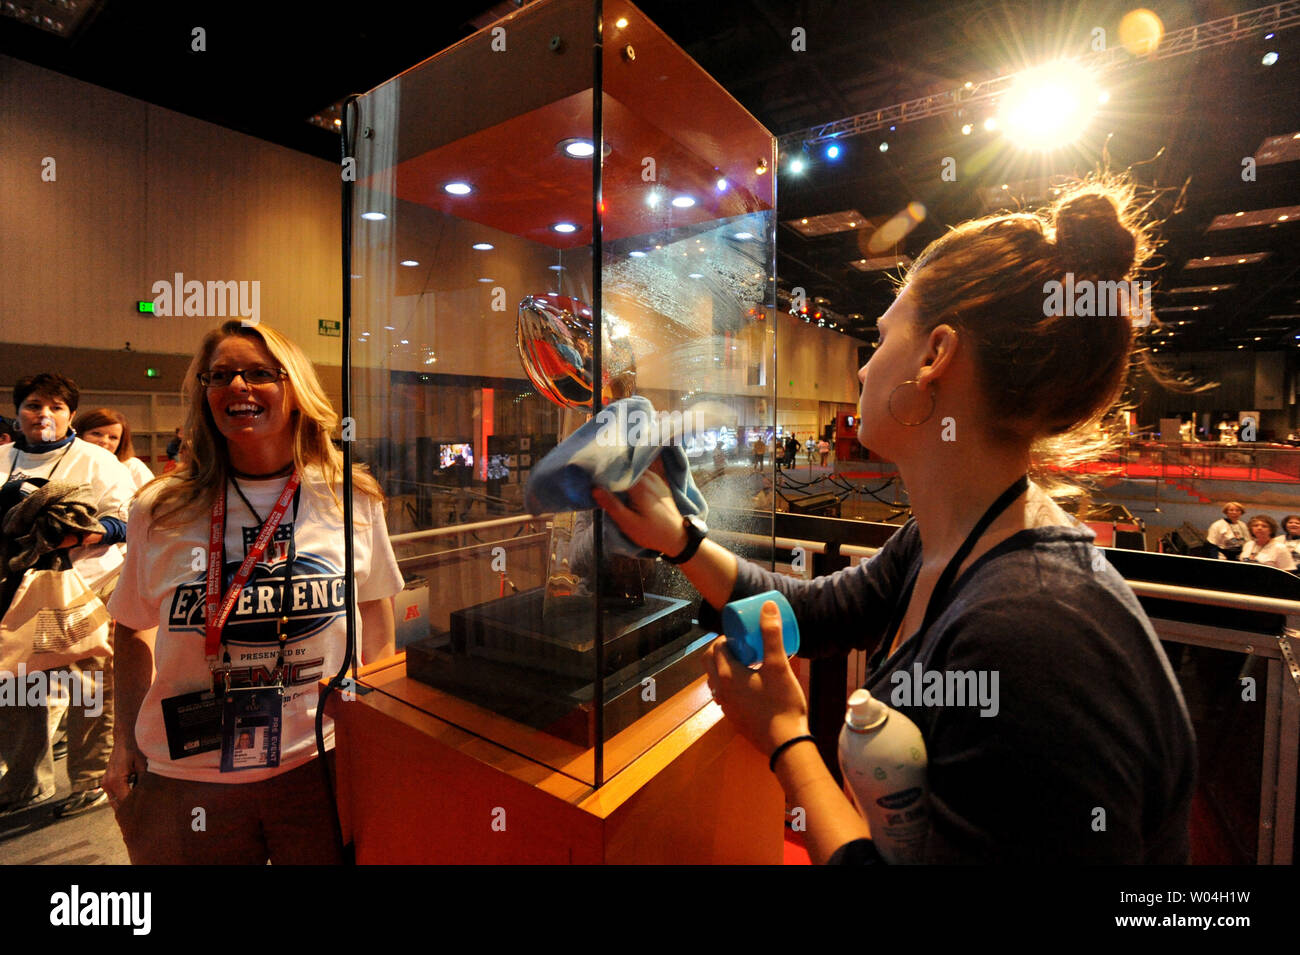 Maria Porter, of Indianapolis, cleans the glass as NFL fans line up to get their picture taken with the NFL Super Bowl Championship Lombardi Trophy at the NFL Experience at the Indianapolis Convention Center in downtown Indianapolis, Indiana on February 3, 2012.   The New England Patriots play the New York Giants in the Super Bowl on February 5, 2012.   UPI/Pat Benic Stock Photo